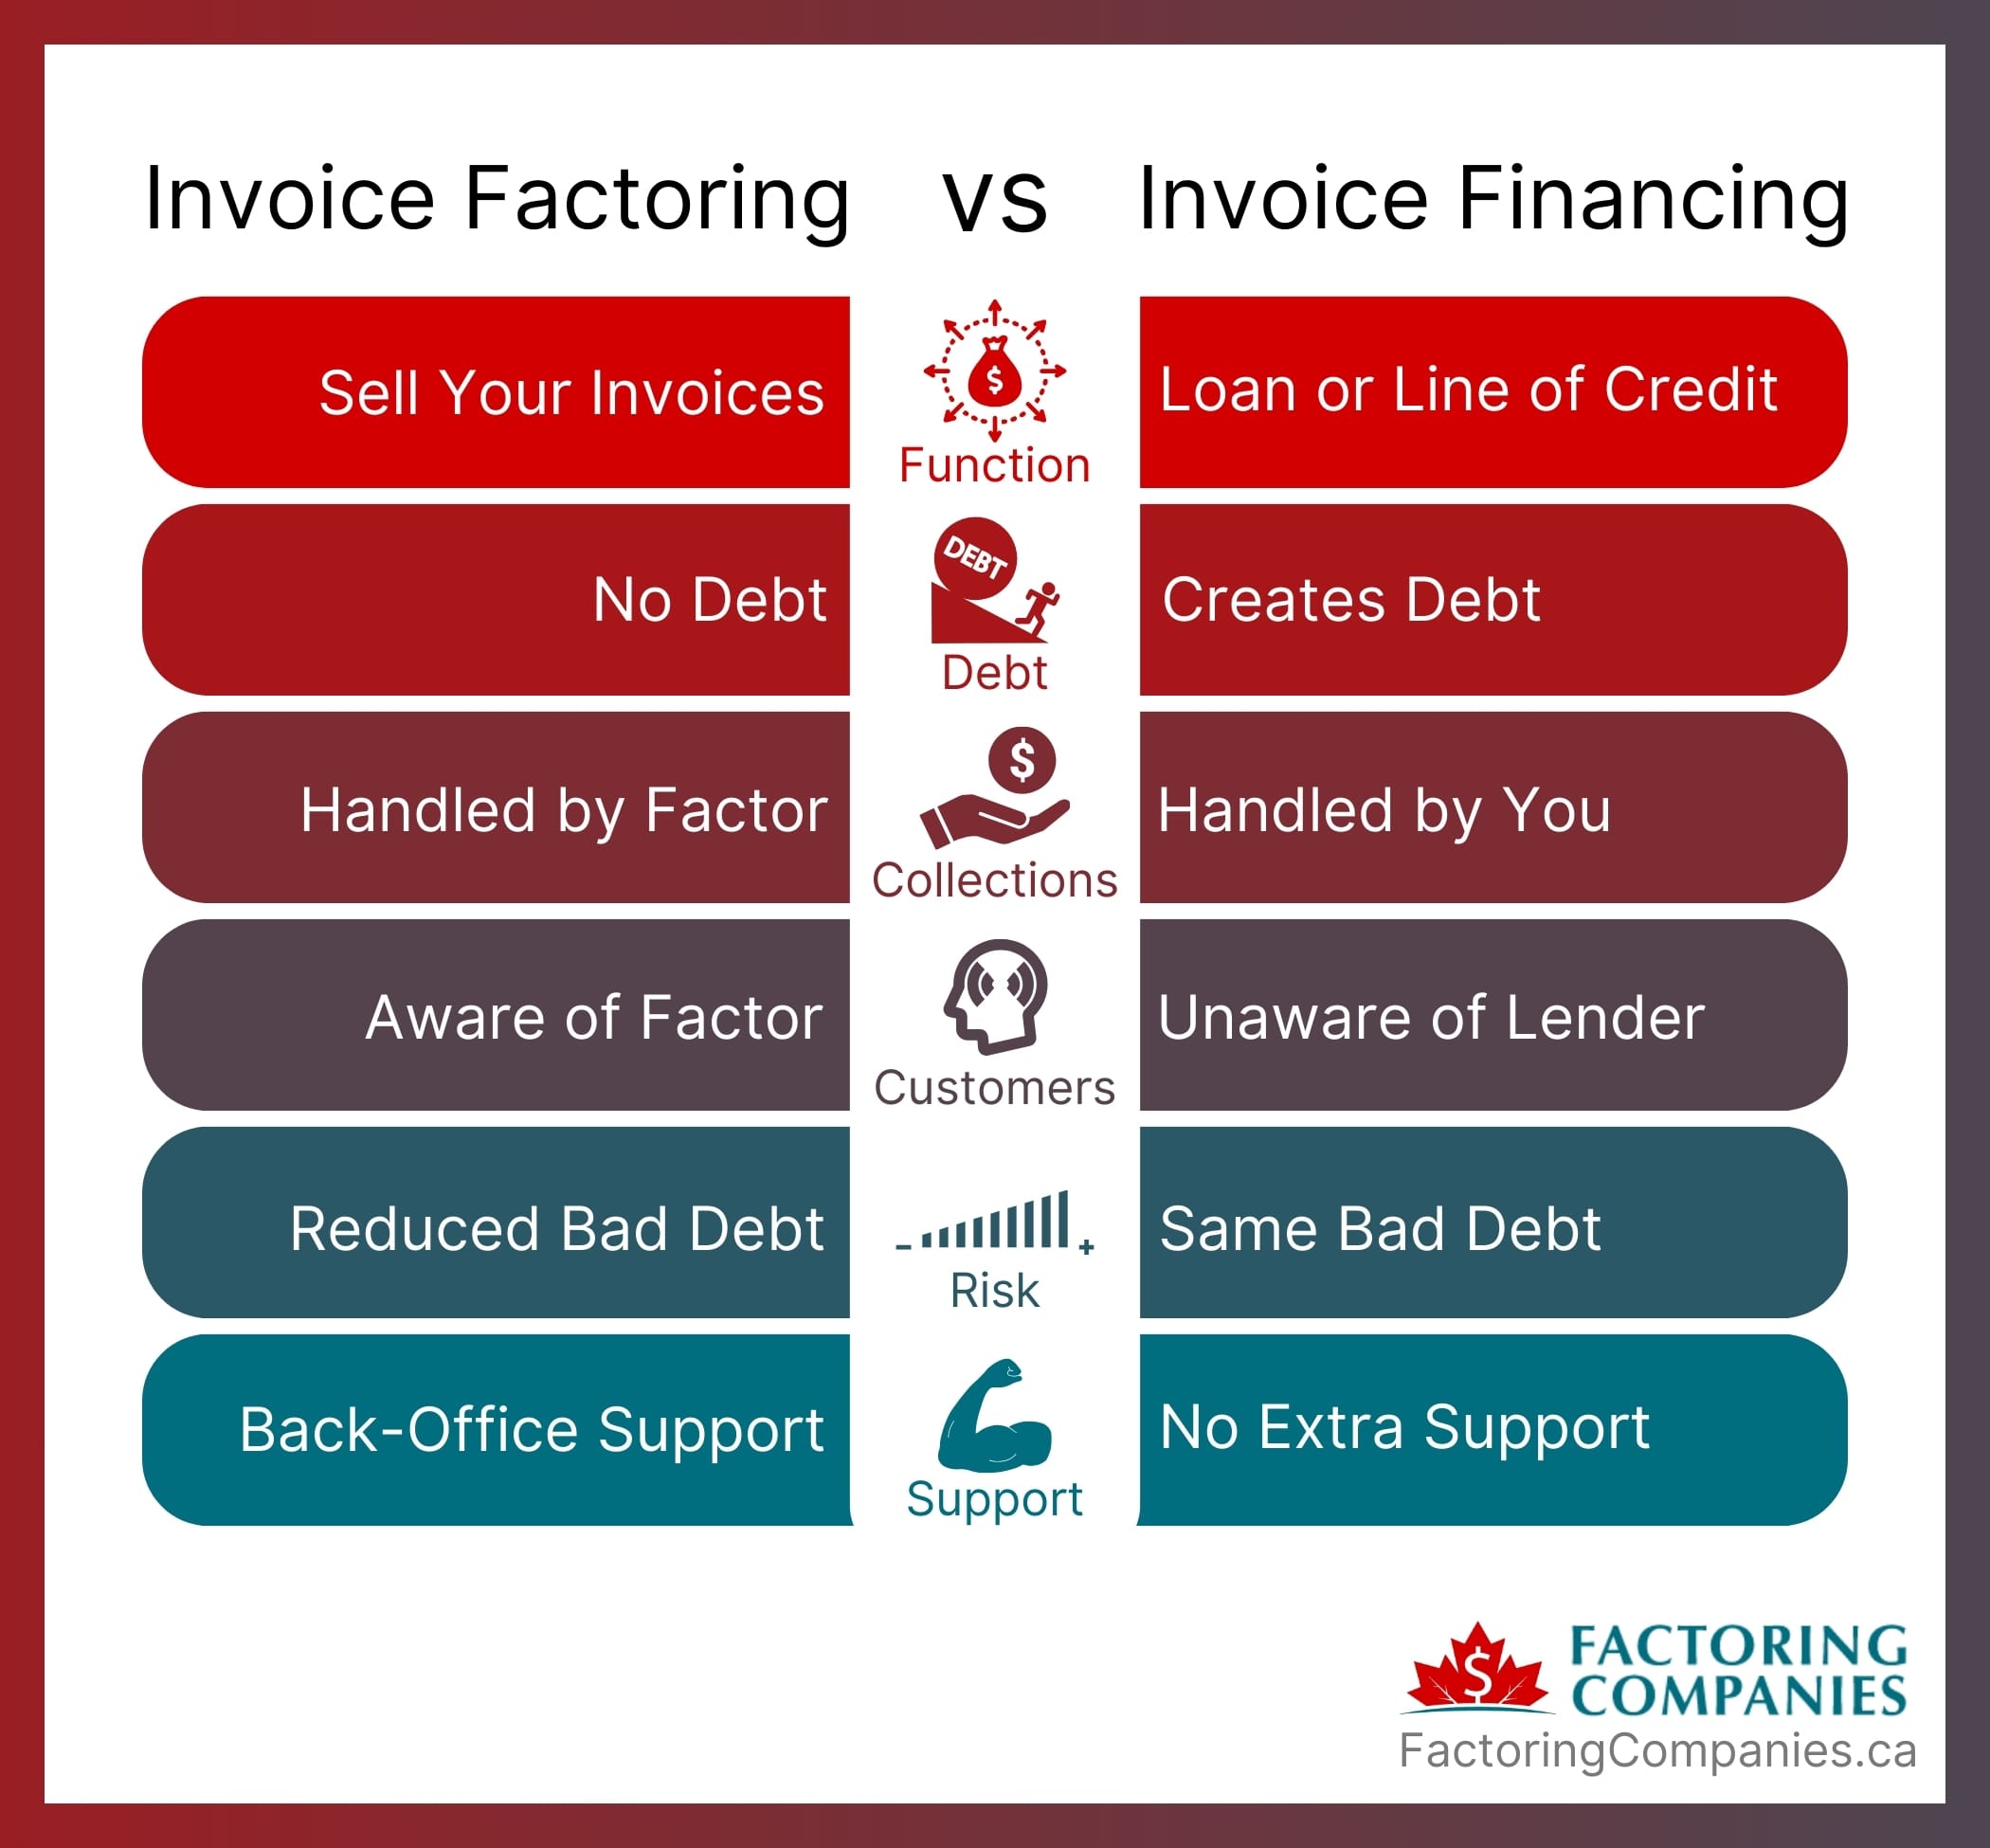 Differences Between Invoice Factoring and Invoice Financing